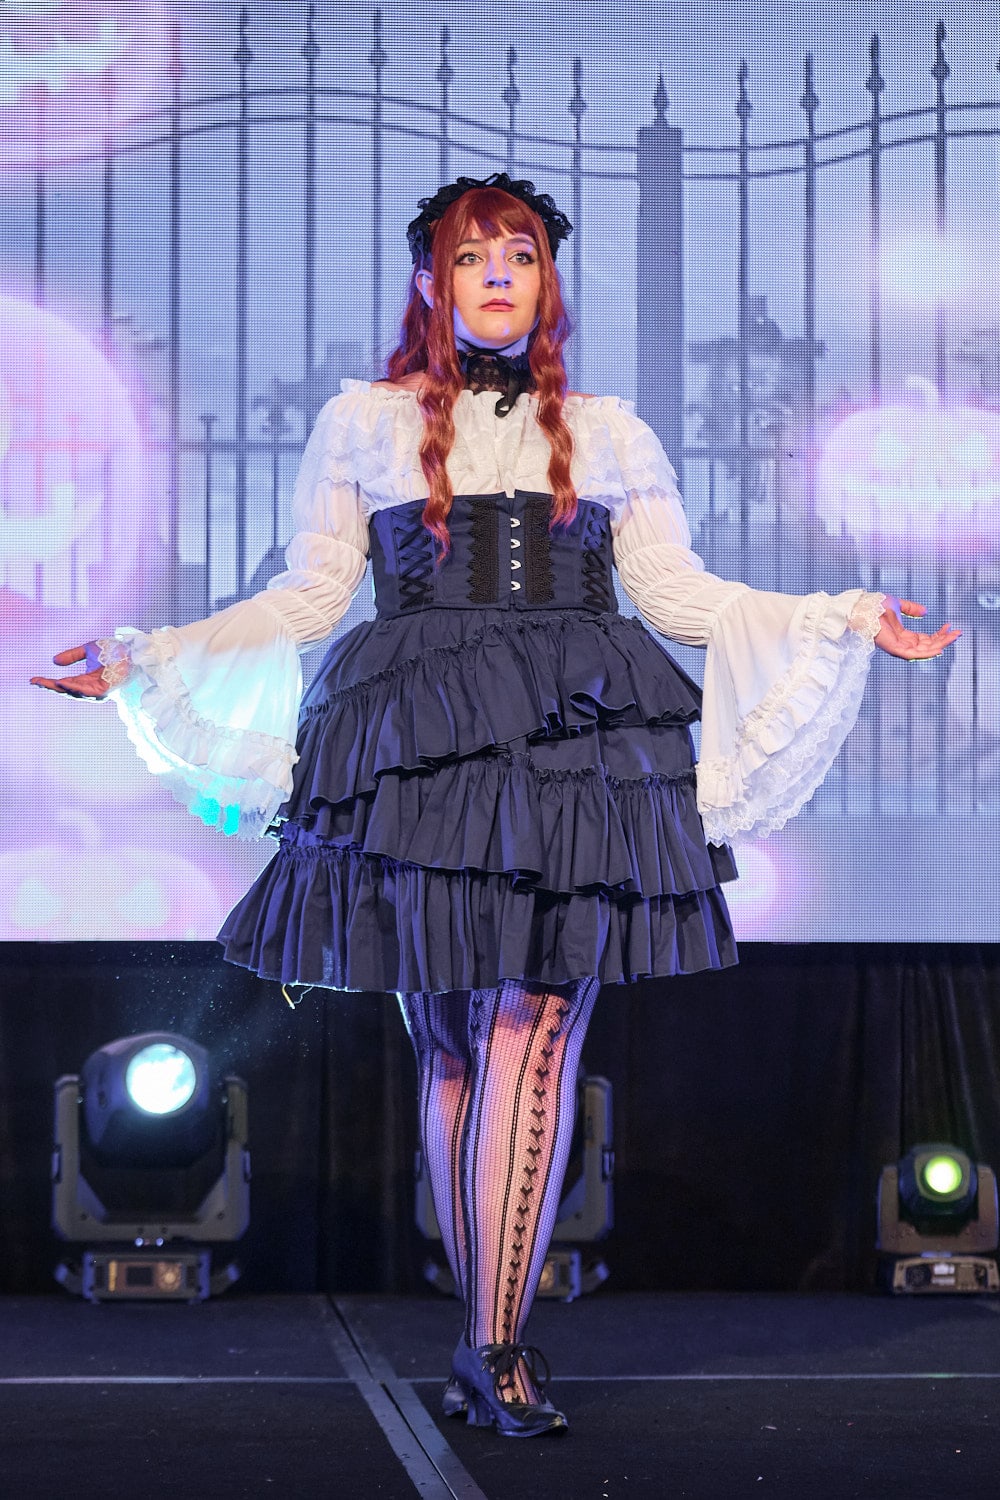 Lolita fashion model wearing lace headdress, white frilly blouse, navy corset, and navy tiered skirt - full body 2.